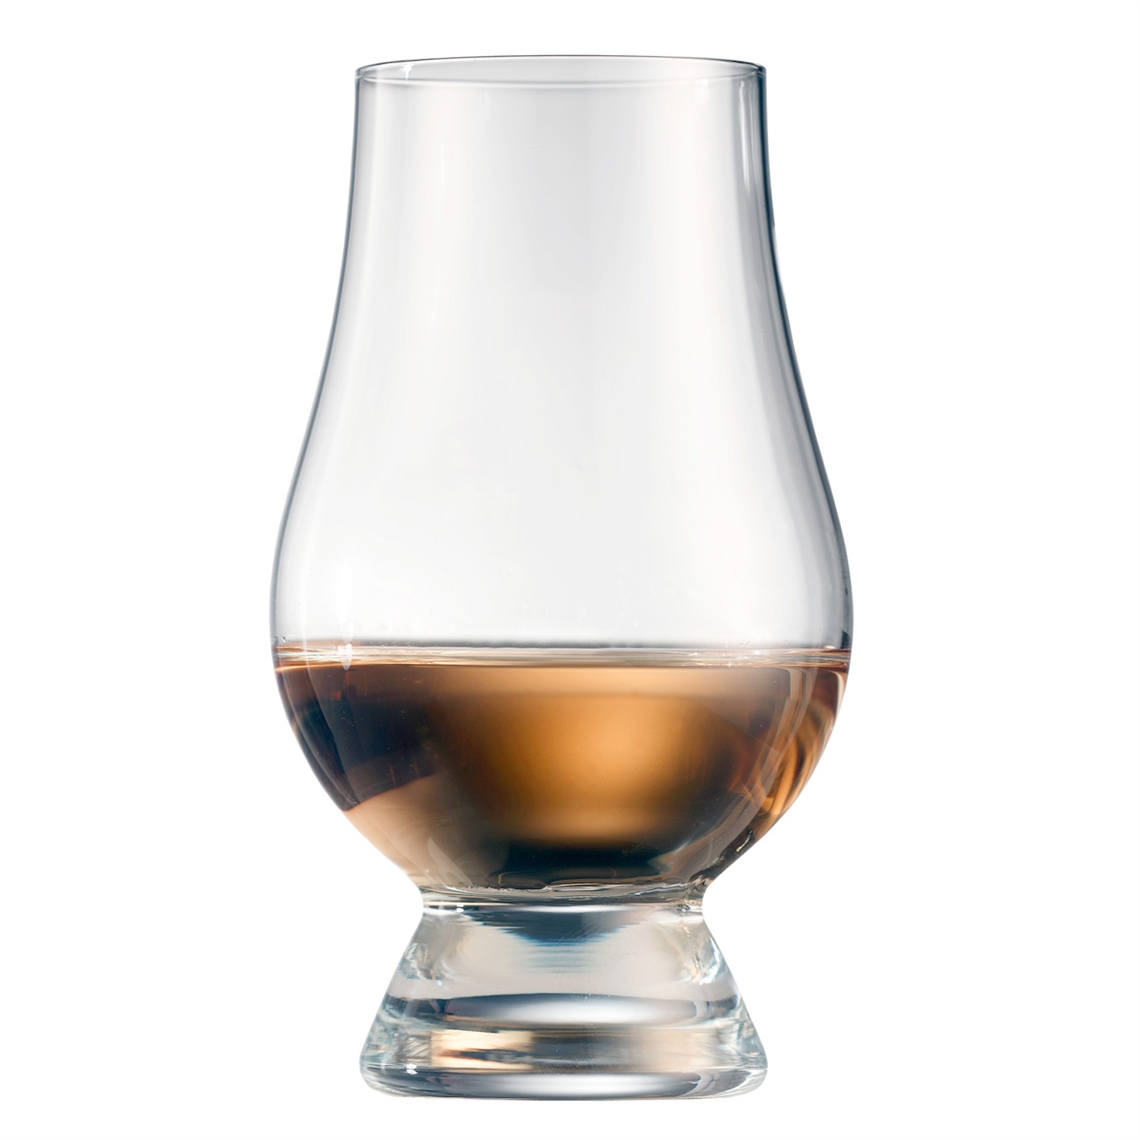 View more riedel sale from our Whisky Glasses range